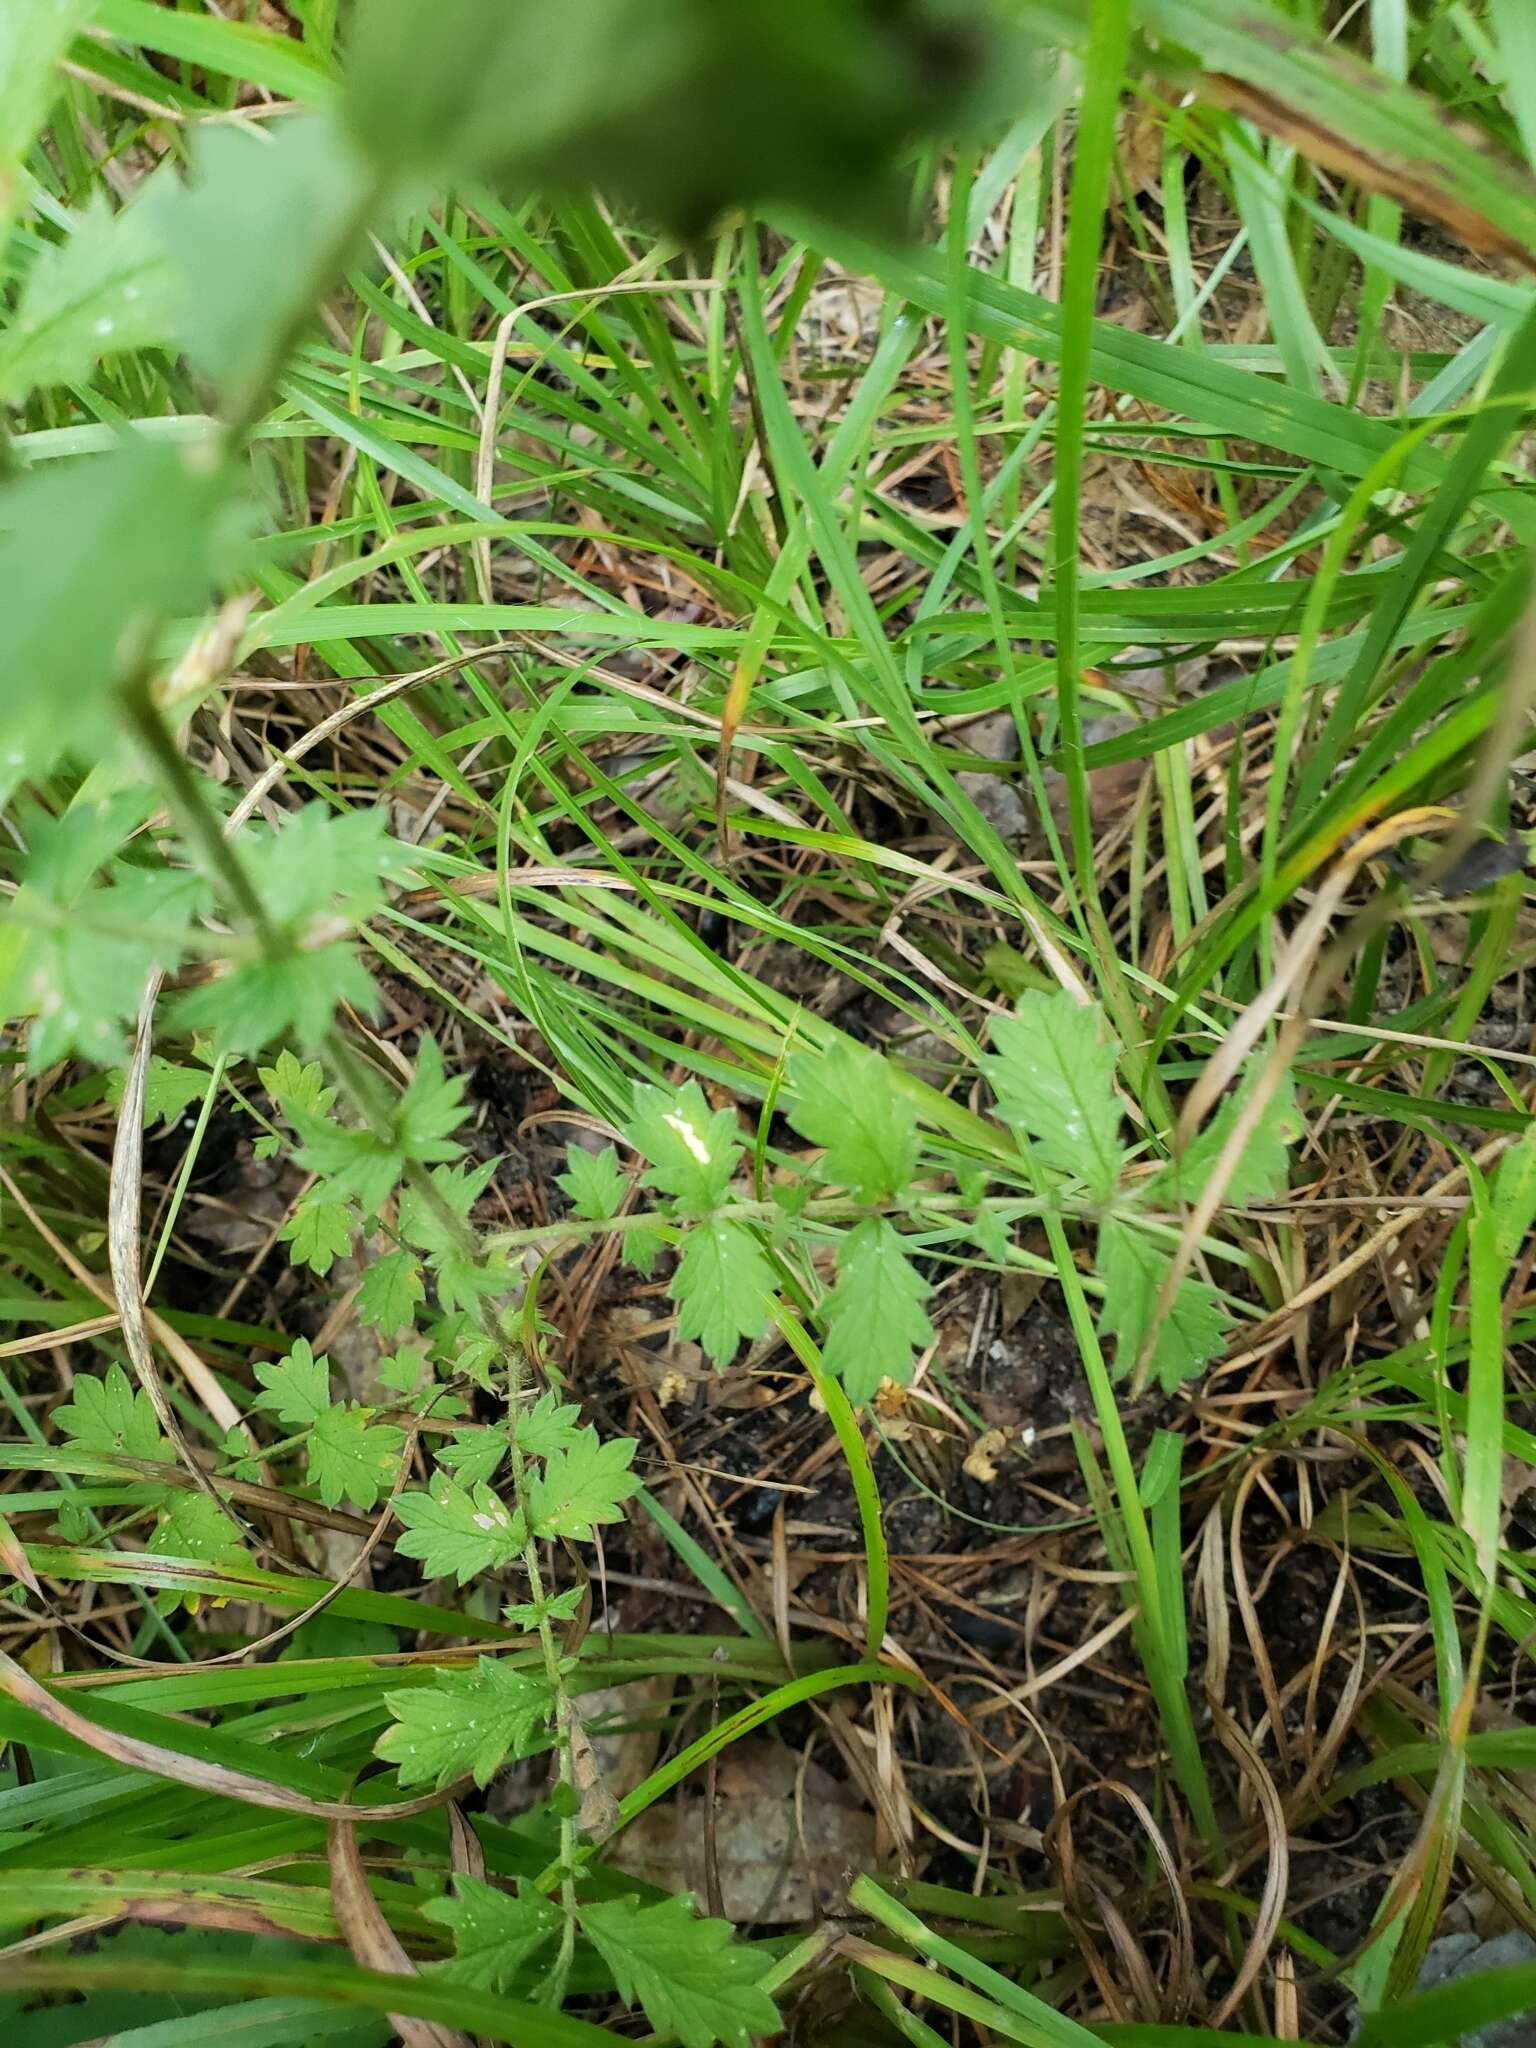 Image of incised agrimony